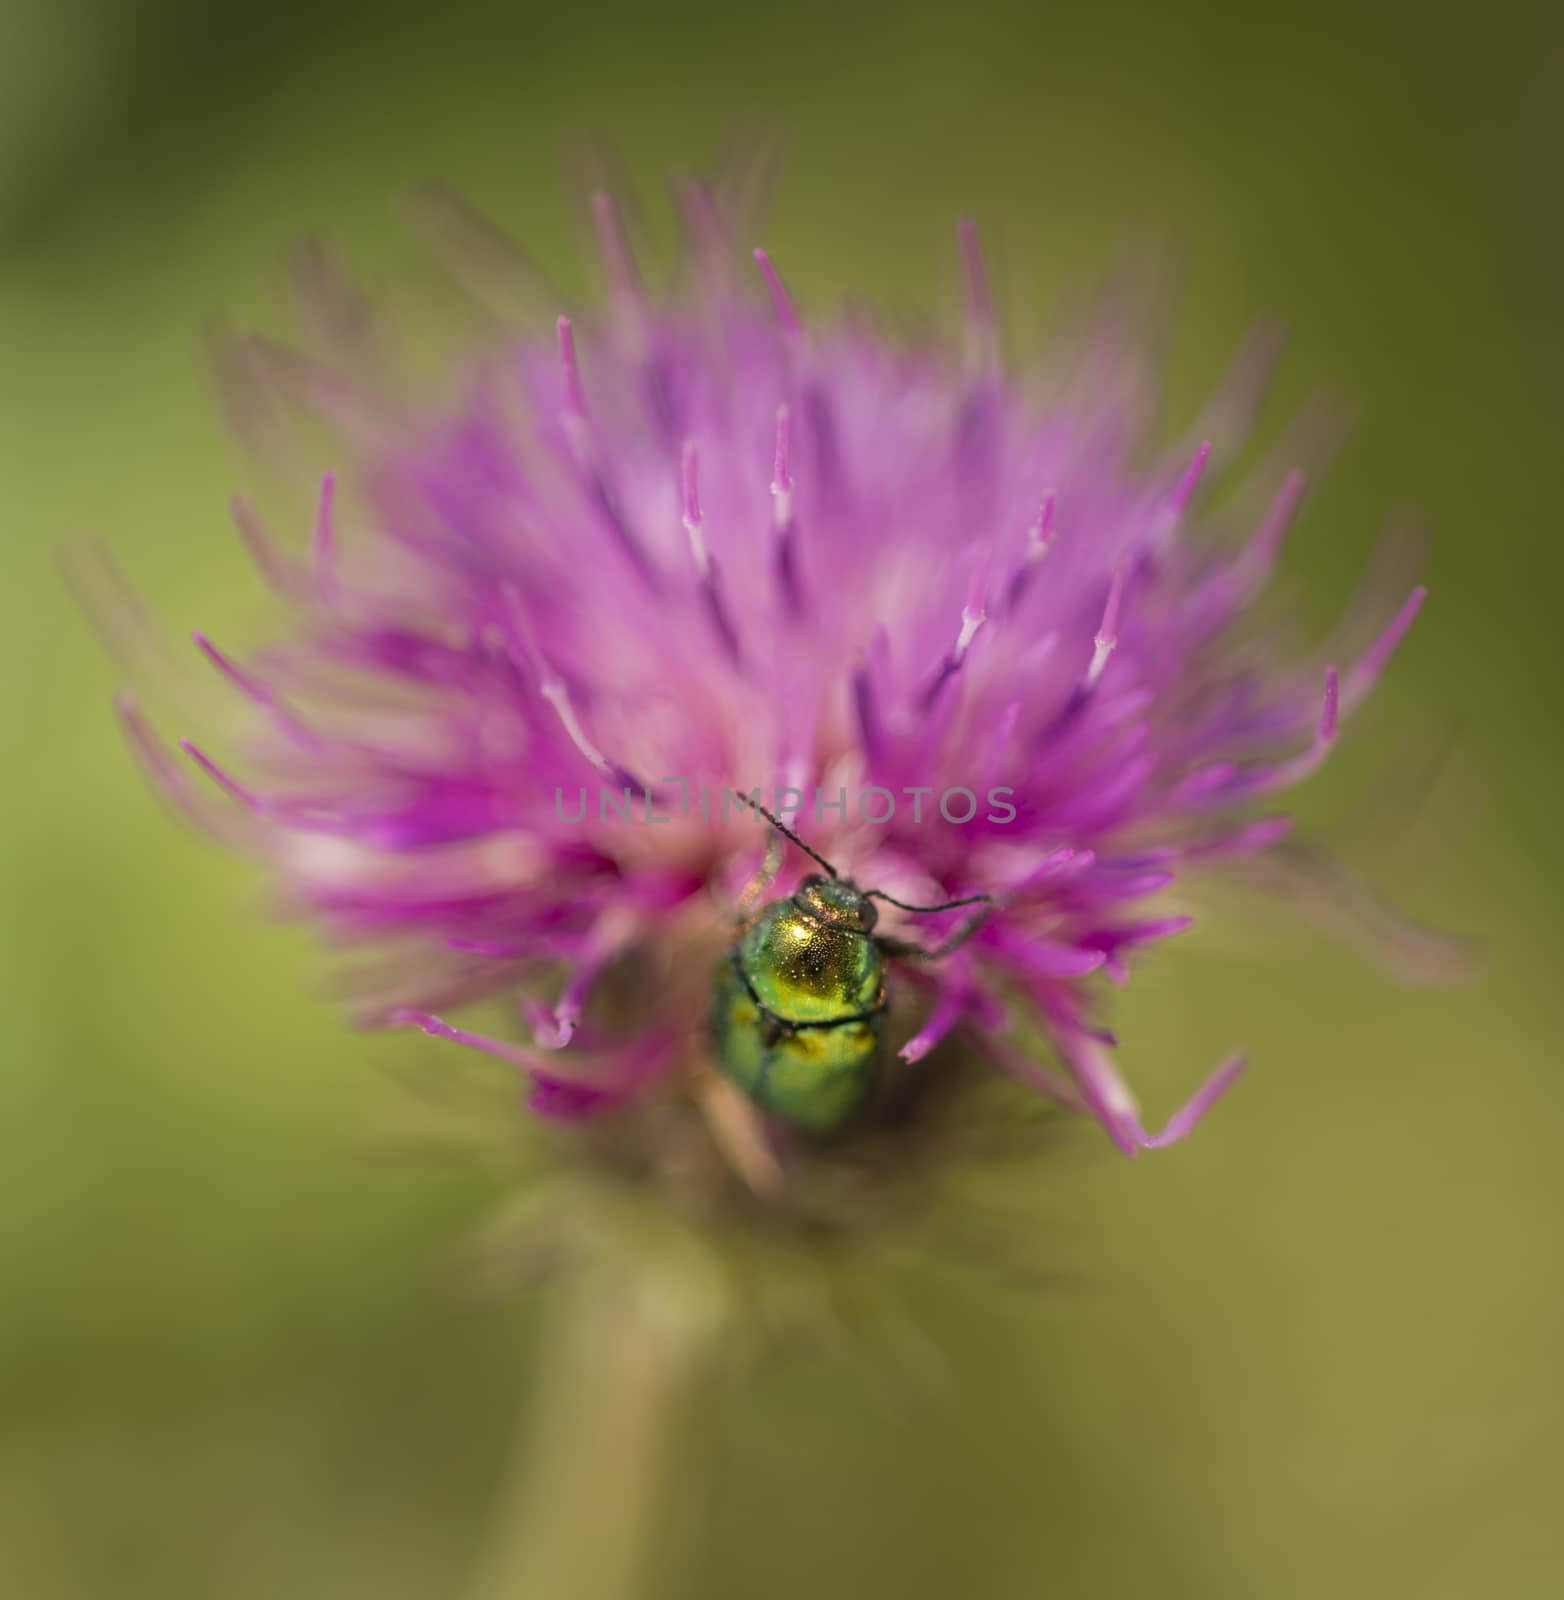 jewel coleopteron insect on pink clover flower by AlessandroZocc